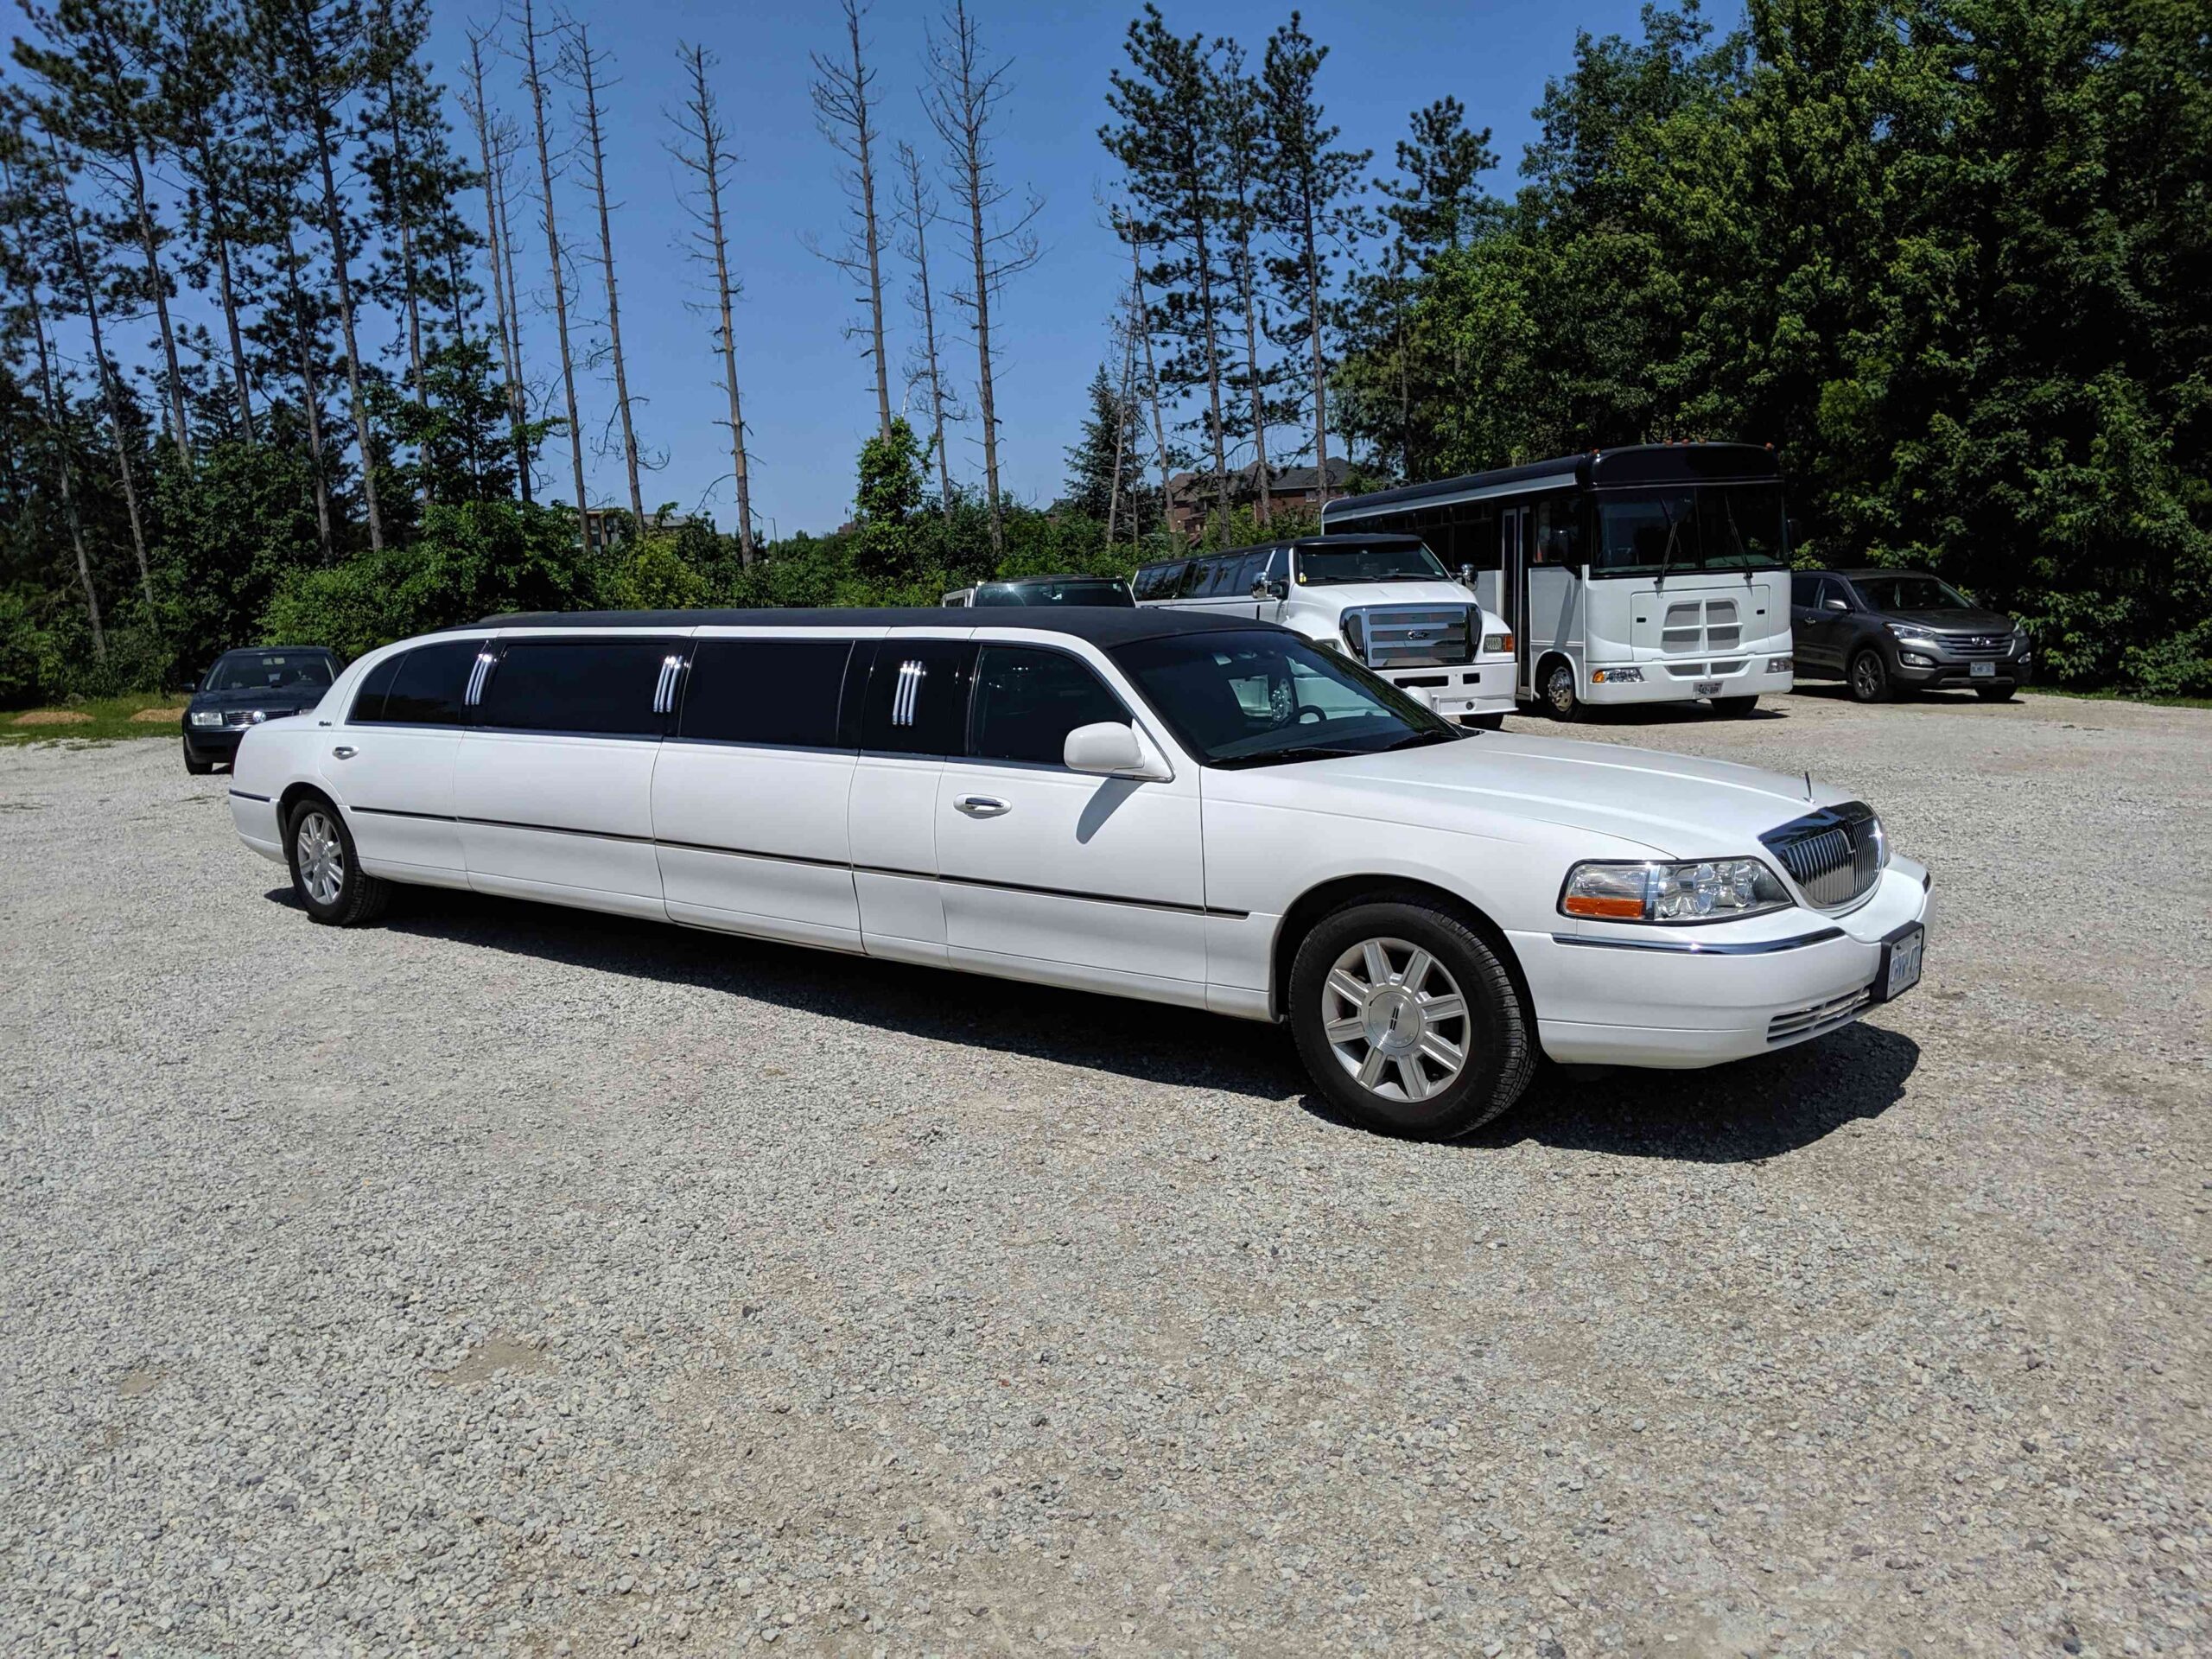 Rent a Limo in Toronto